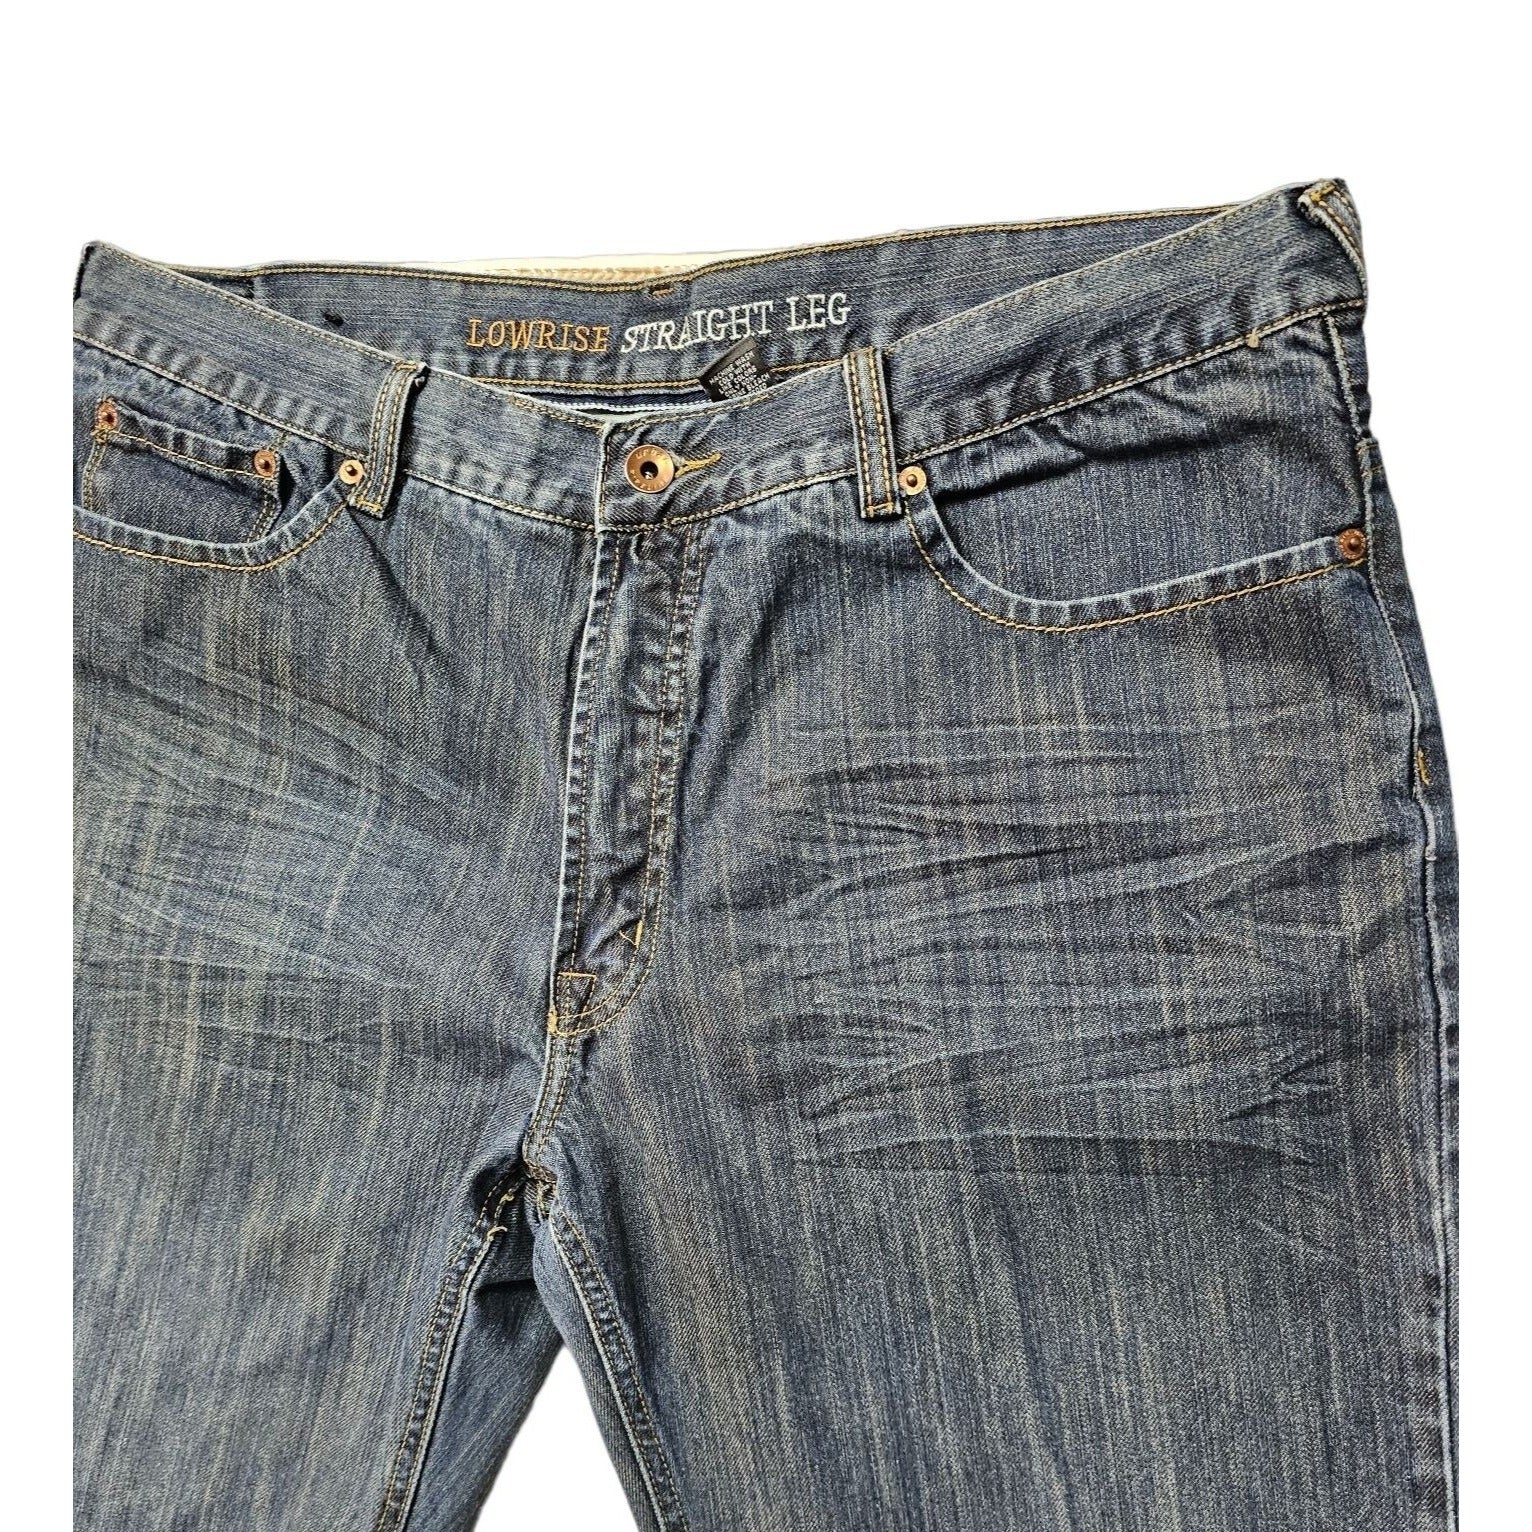 Urban Up Size 38x30, Low Rise with Hip Ripples, Straight Leg Men's Casual Jeans